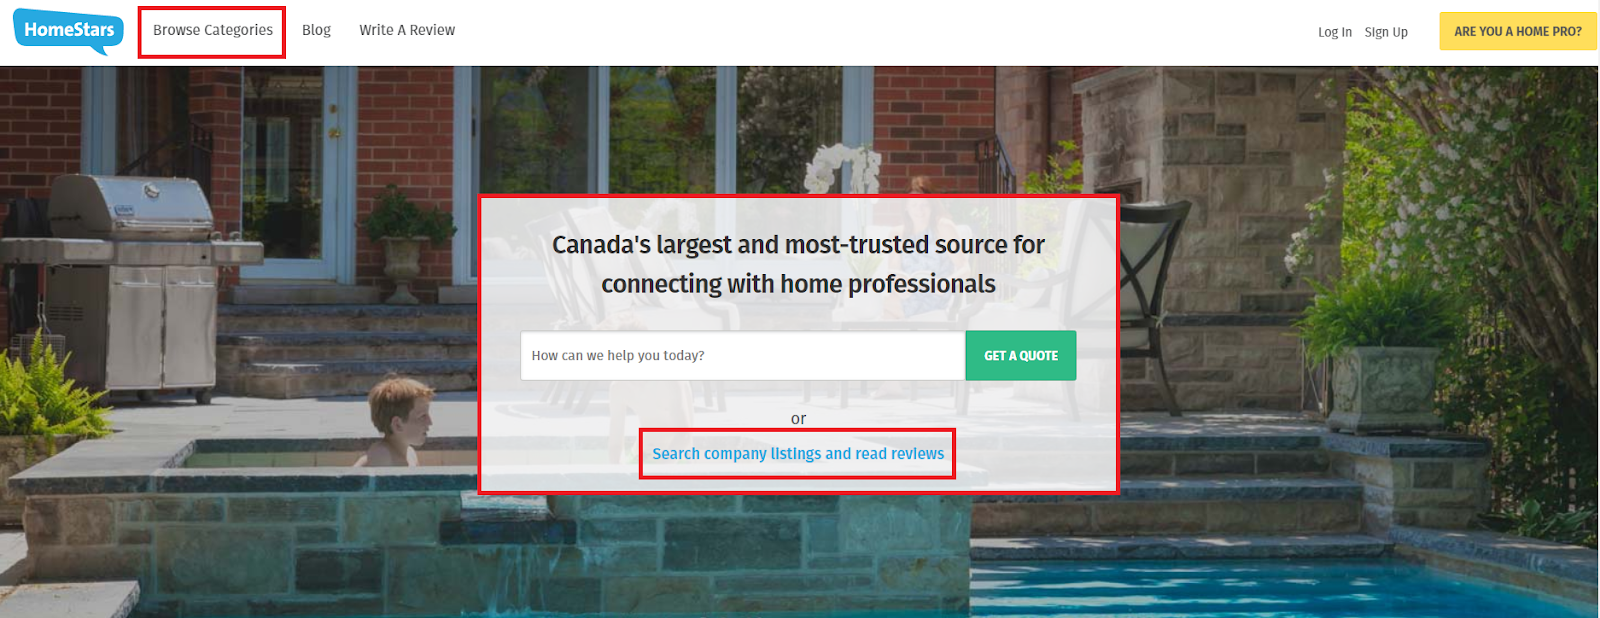 how to select a pro on homestars homepage